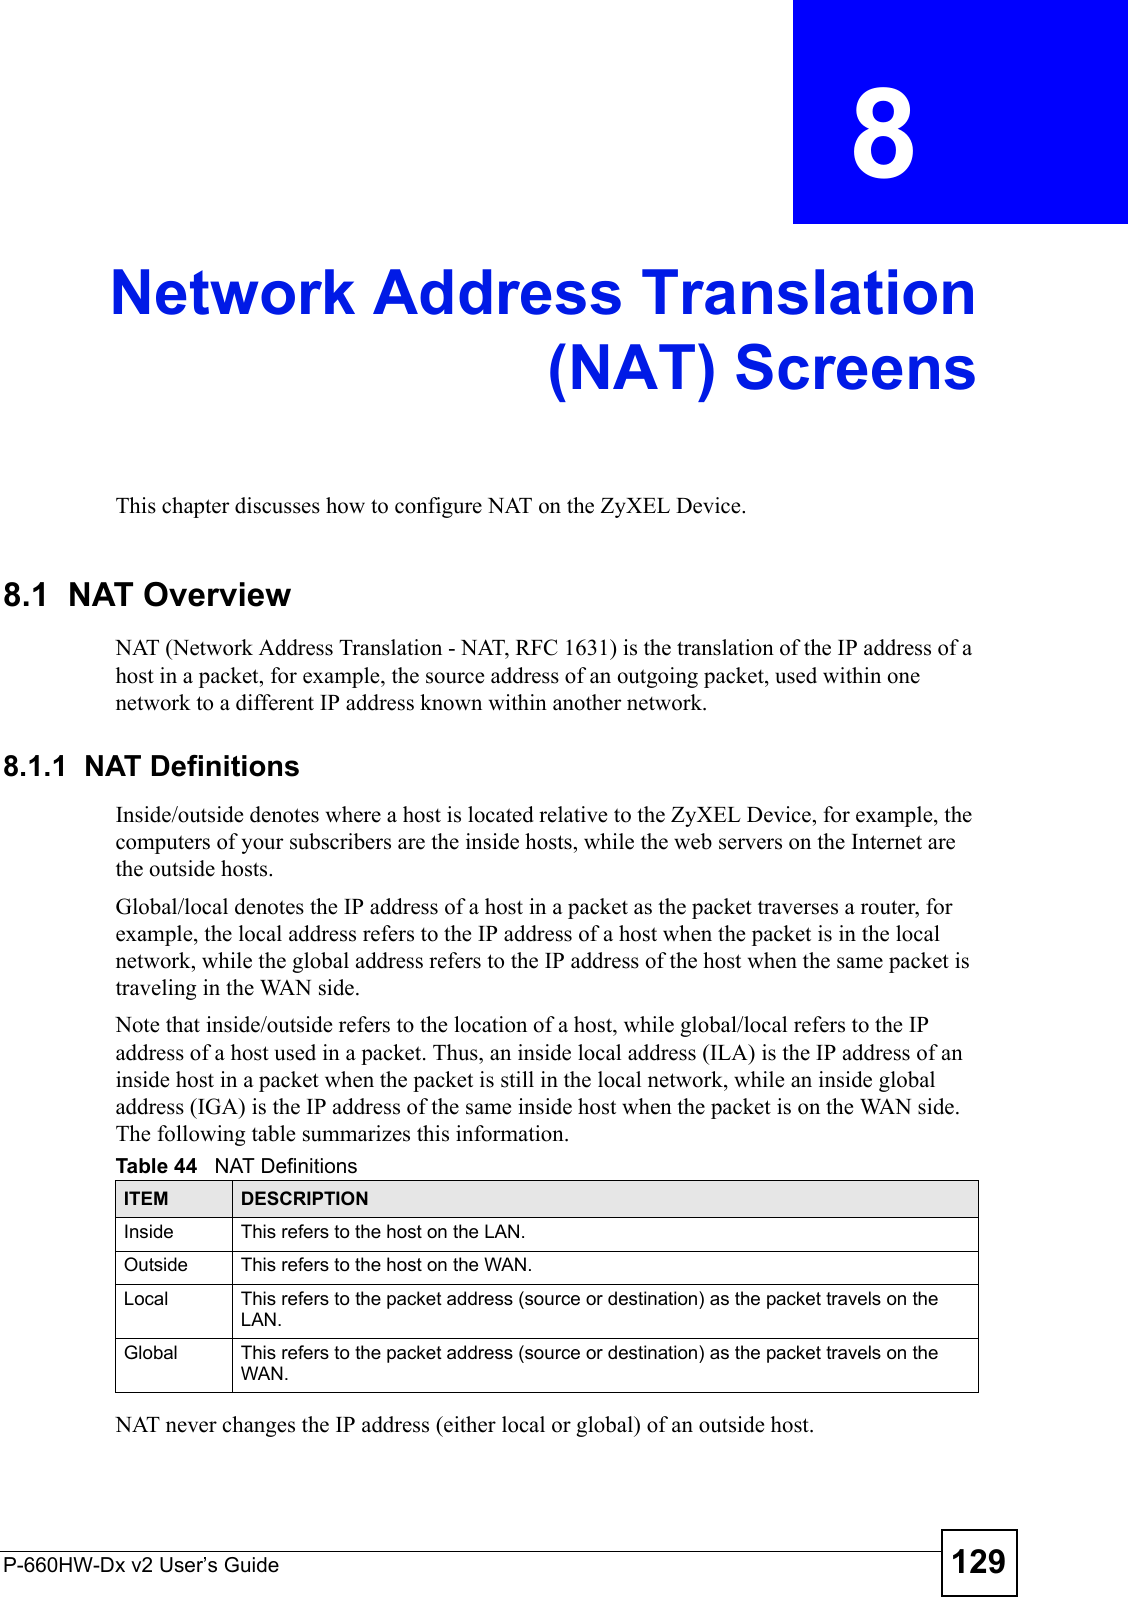 P-660HW-Dx v2 User’s Guide 129CHAPTER  8 Network Address Translation(NAT) ScreensThis chapter discusses how to configure NAT on the ZyXEL Device.8.1  NAT Overview NAT (Network Address Translation - NAT, RFC 1631) is the translation of the IP address of a host in a packet, for example, the source address of an outgoing packet, used within one network to a different IP address known within another network. 8.1.1  NAT DefinitionsInside/outside denotes where a host is located relative to the ZyXEL Device, for example, the computers of your subscribers are the inside hosts, while the web servers on the Internet are the outside hosts. Global/local denotes the IP address of a host in a packet as the packet traverses a router, for example, the local address refers to the IP address of a host when the packet is in the local network, while the global address refers to the IP address of the host when the same packet is traveling in the WAN side. Note that inside/outside refers to the location of a host, while global/local refers to the IP address of a host used in a packet. Thus, an inside local address (ILA) is the IP address of an inside host in a packet when the packet is still in the local network, while an inside global address (IGA) is the IP address of the same inside host when the packet is on the WAN side. The following table summarizes this information.NAT never changes the IP address (either local or global) of an outside host.Table 44   NAT DefinitionsITEM DESCRIPTIONInside This refers to the host on the LAN.Outside This refers to the host on the WAN.Local This refers to the packet address (source or destination) as the packet travels on the LAN.Global This refers to the packet address (source or destination) as the packet travels on the WAN.